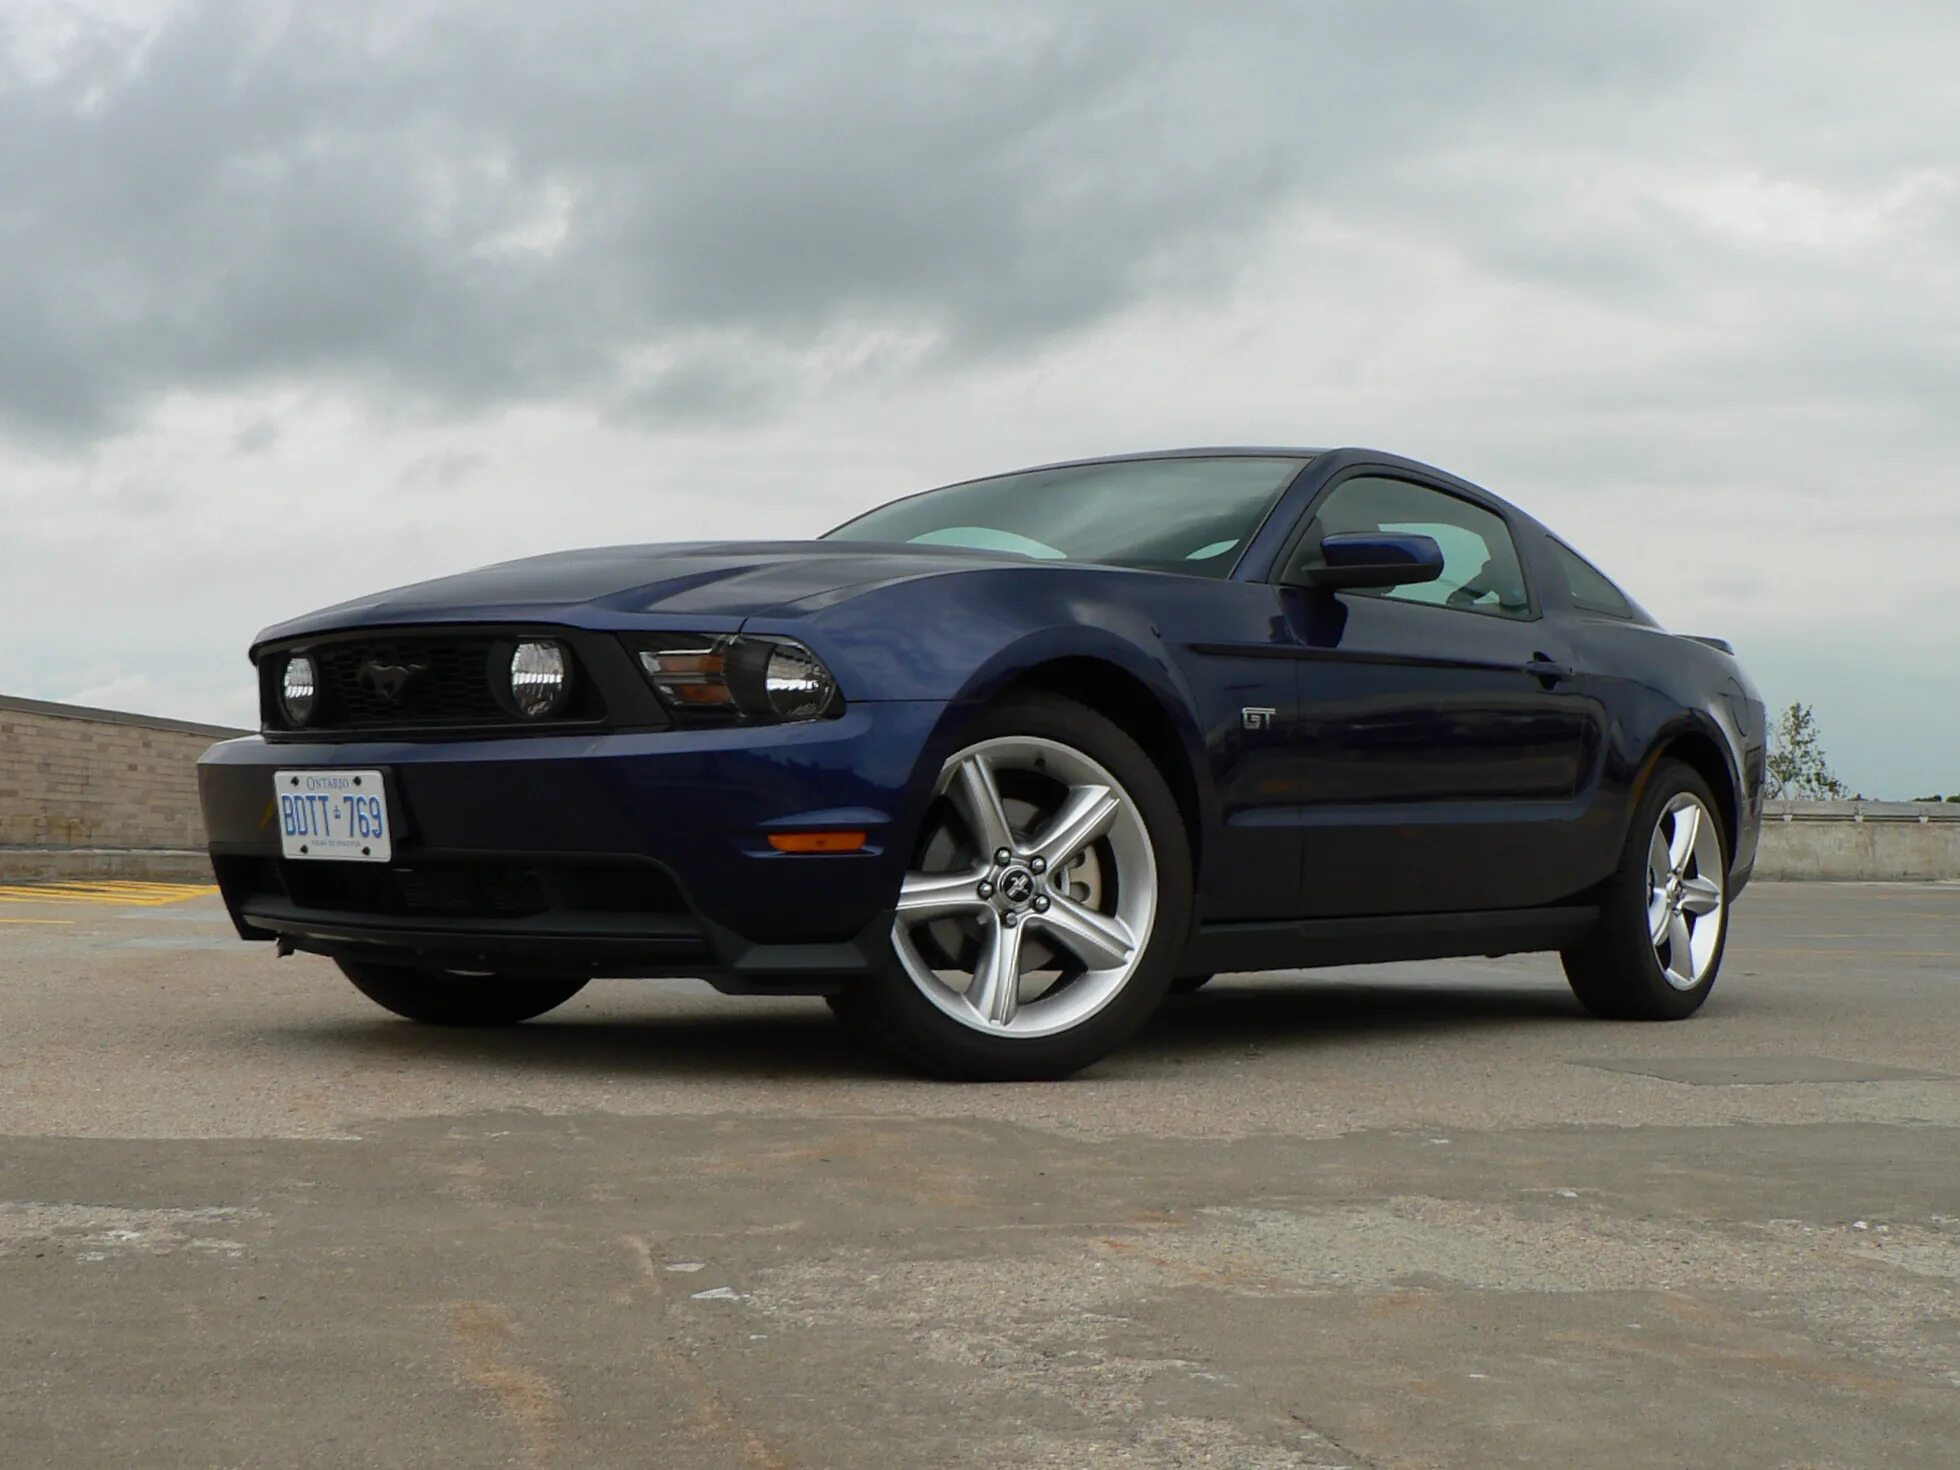 Форд мустанг 5.0. Ford Mustang gt 5.0. Ford Mustang gt 2010. Форд Мустанг 8.